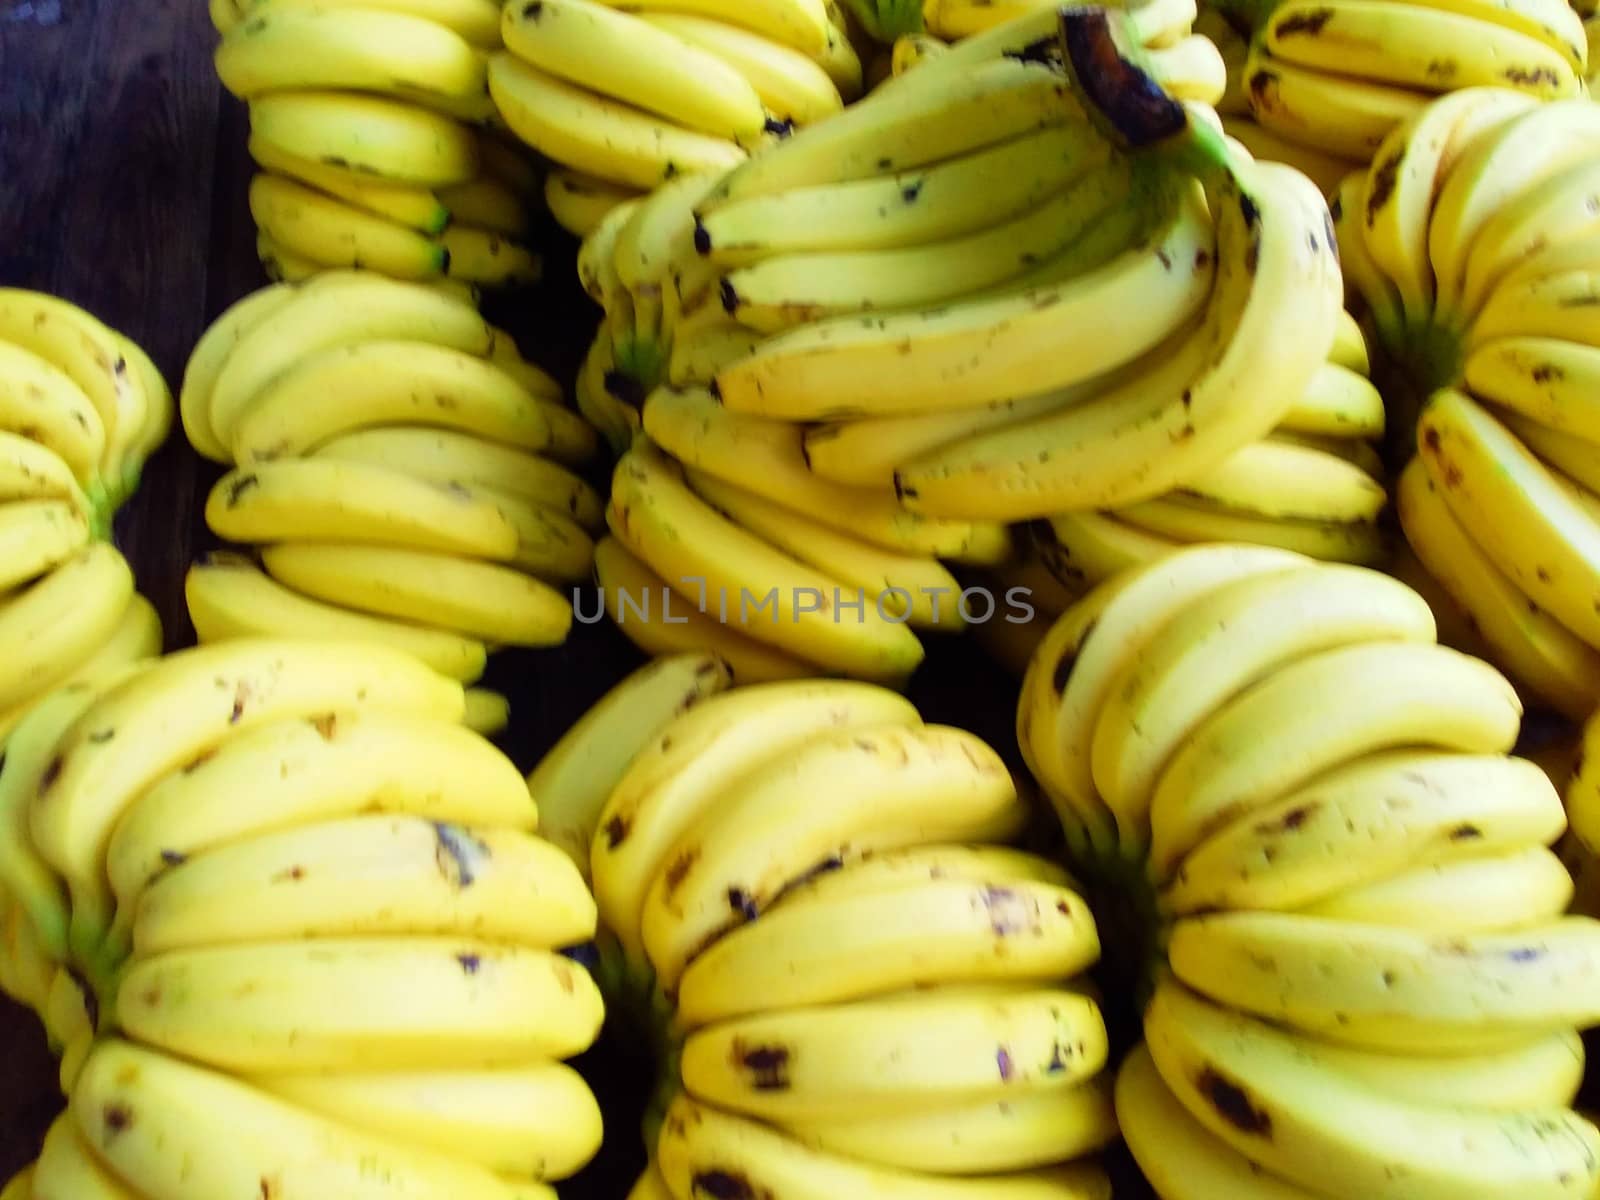 bananas for sale in the market